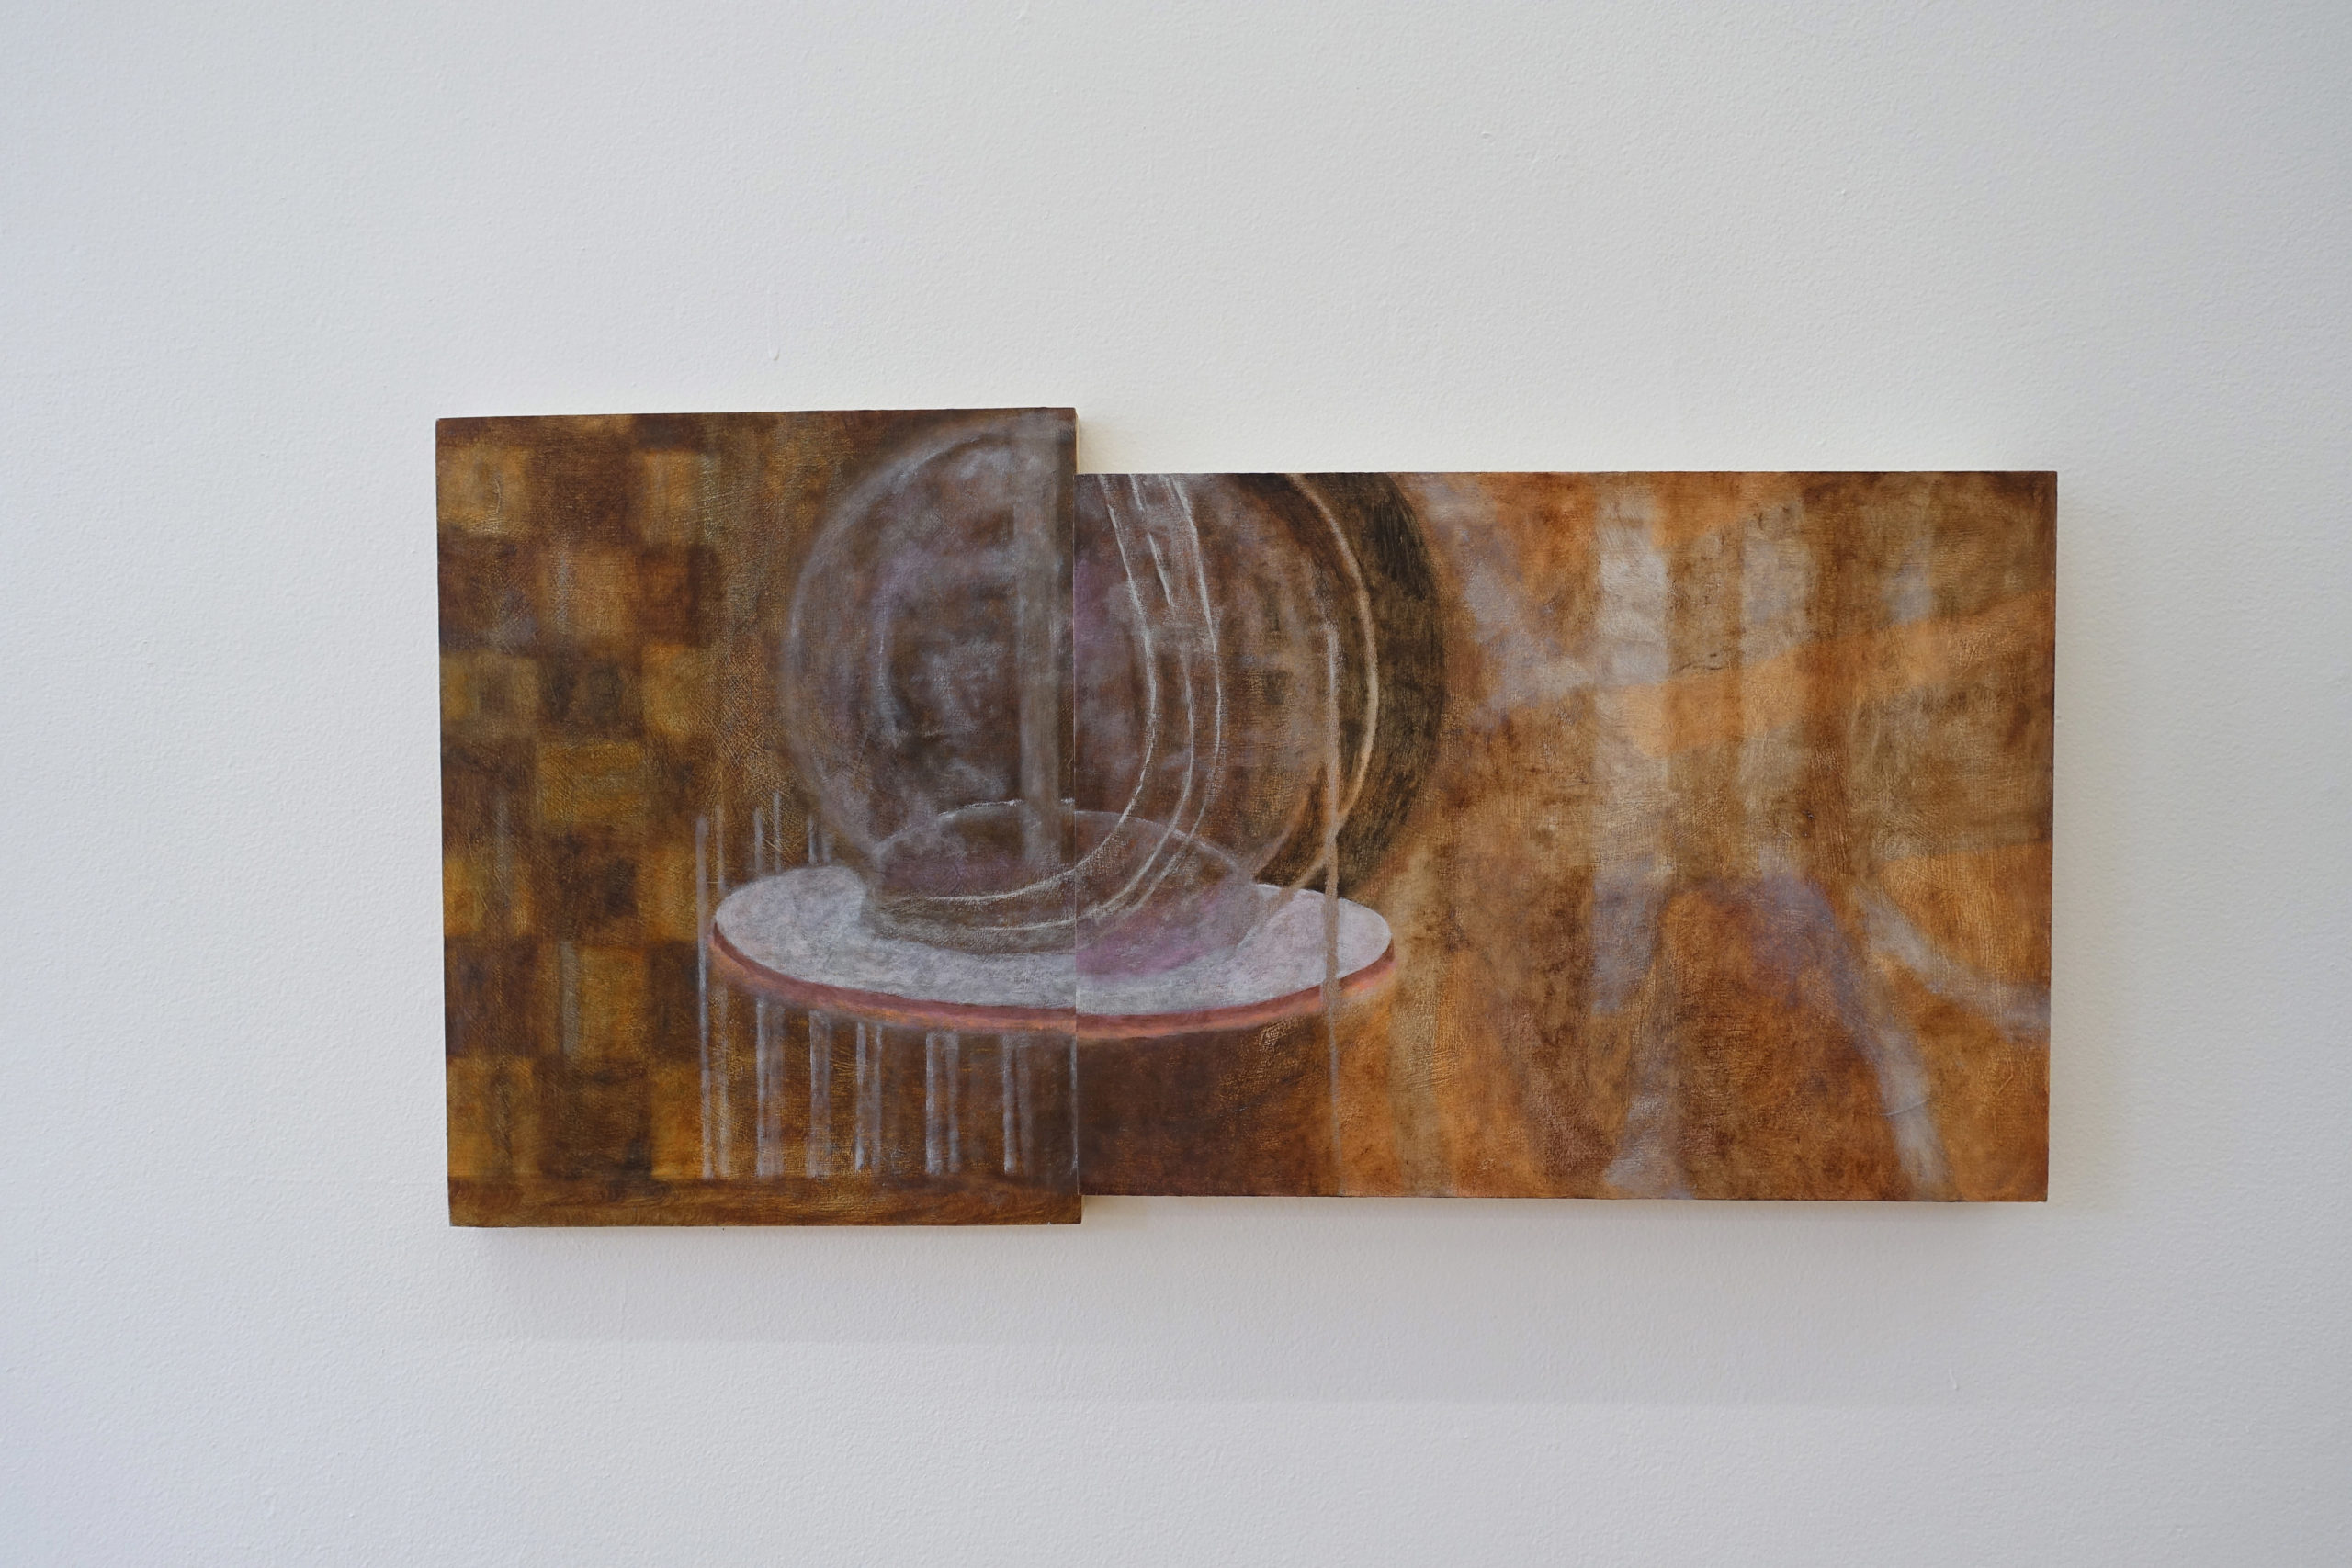 This is an installation view photo of one of Angela Zhang's paintings from the exhibition Fleece Engine.